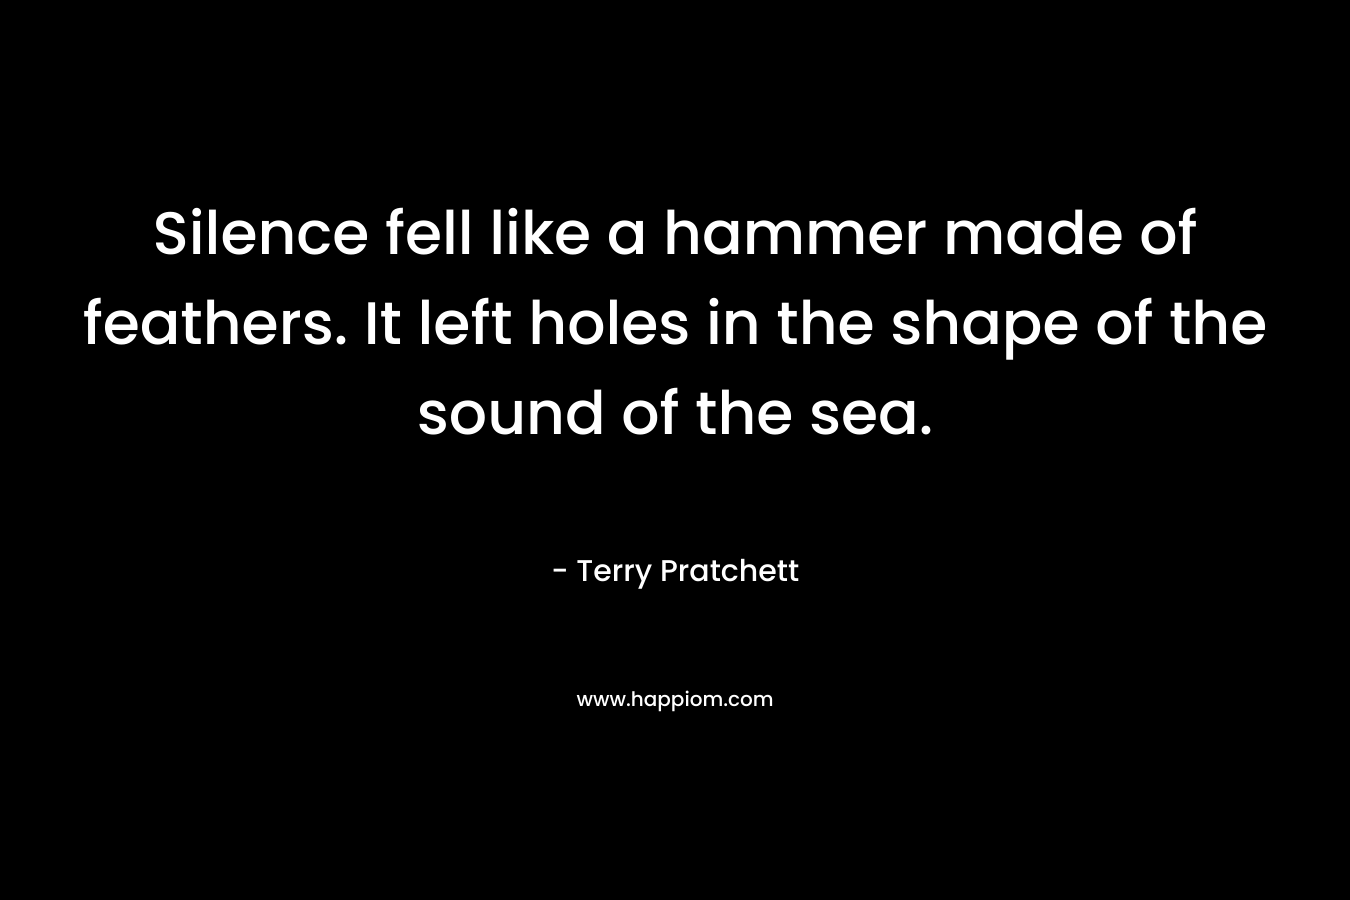 Silence fell like a hammer made of feathers. It left holes in the shape of the sound of the sea. – Terry Pratchett